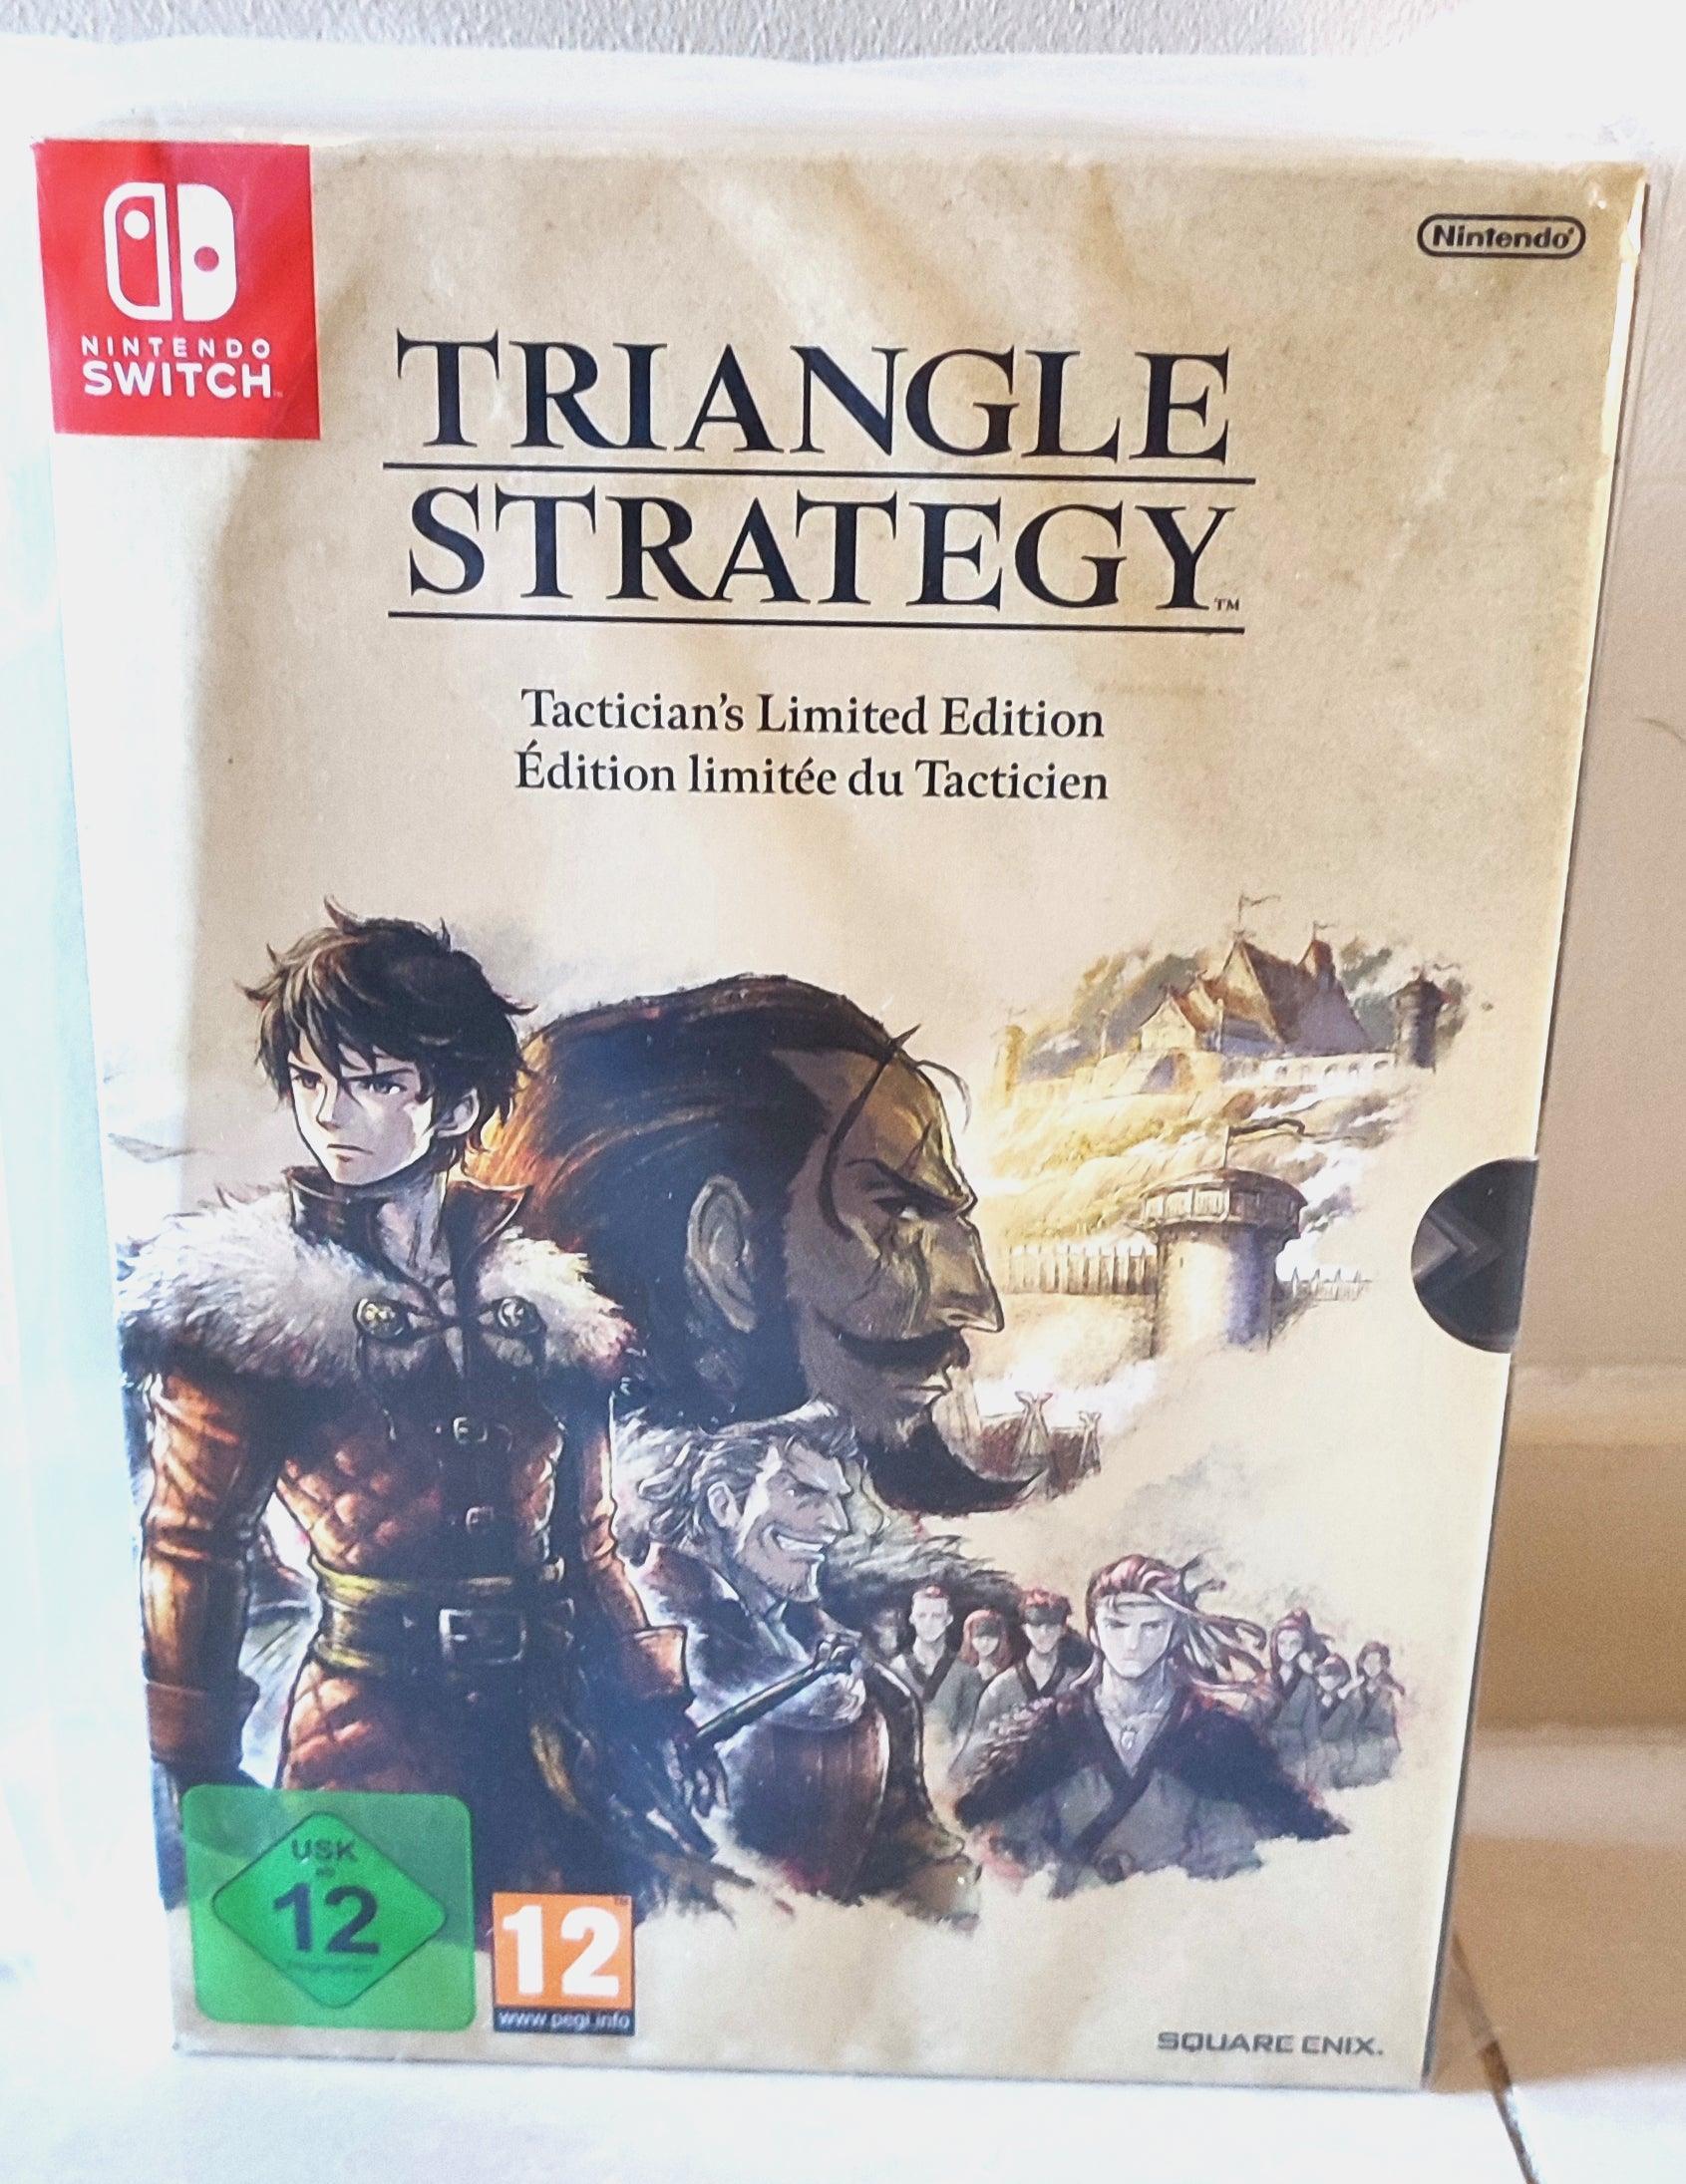 Best Strategy Games Nintendo Switch, Triangle Strategy Nintendo Switch